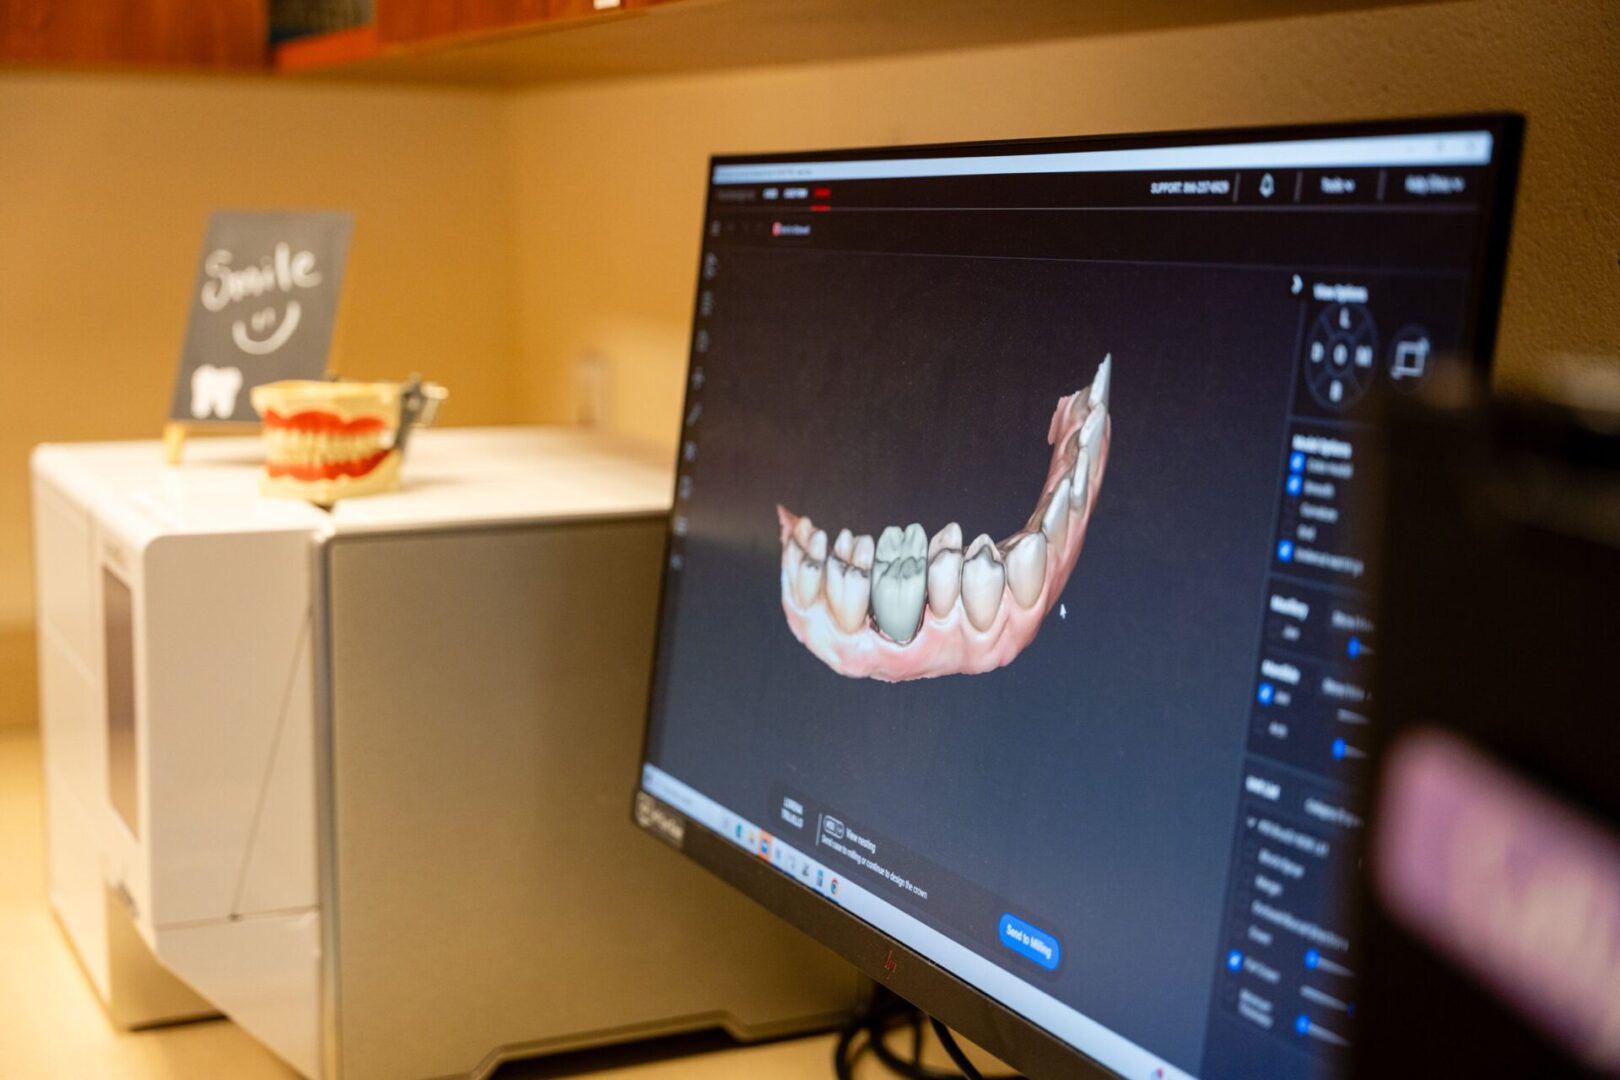 A computer screen showing an image of teeth